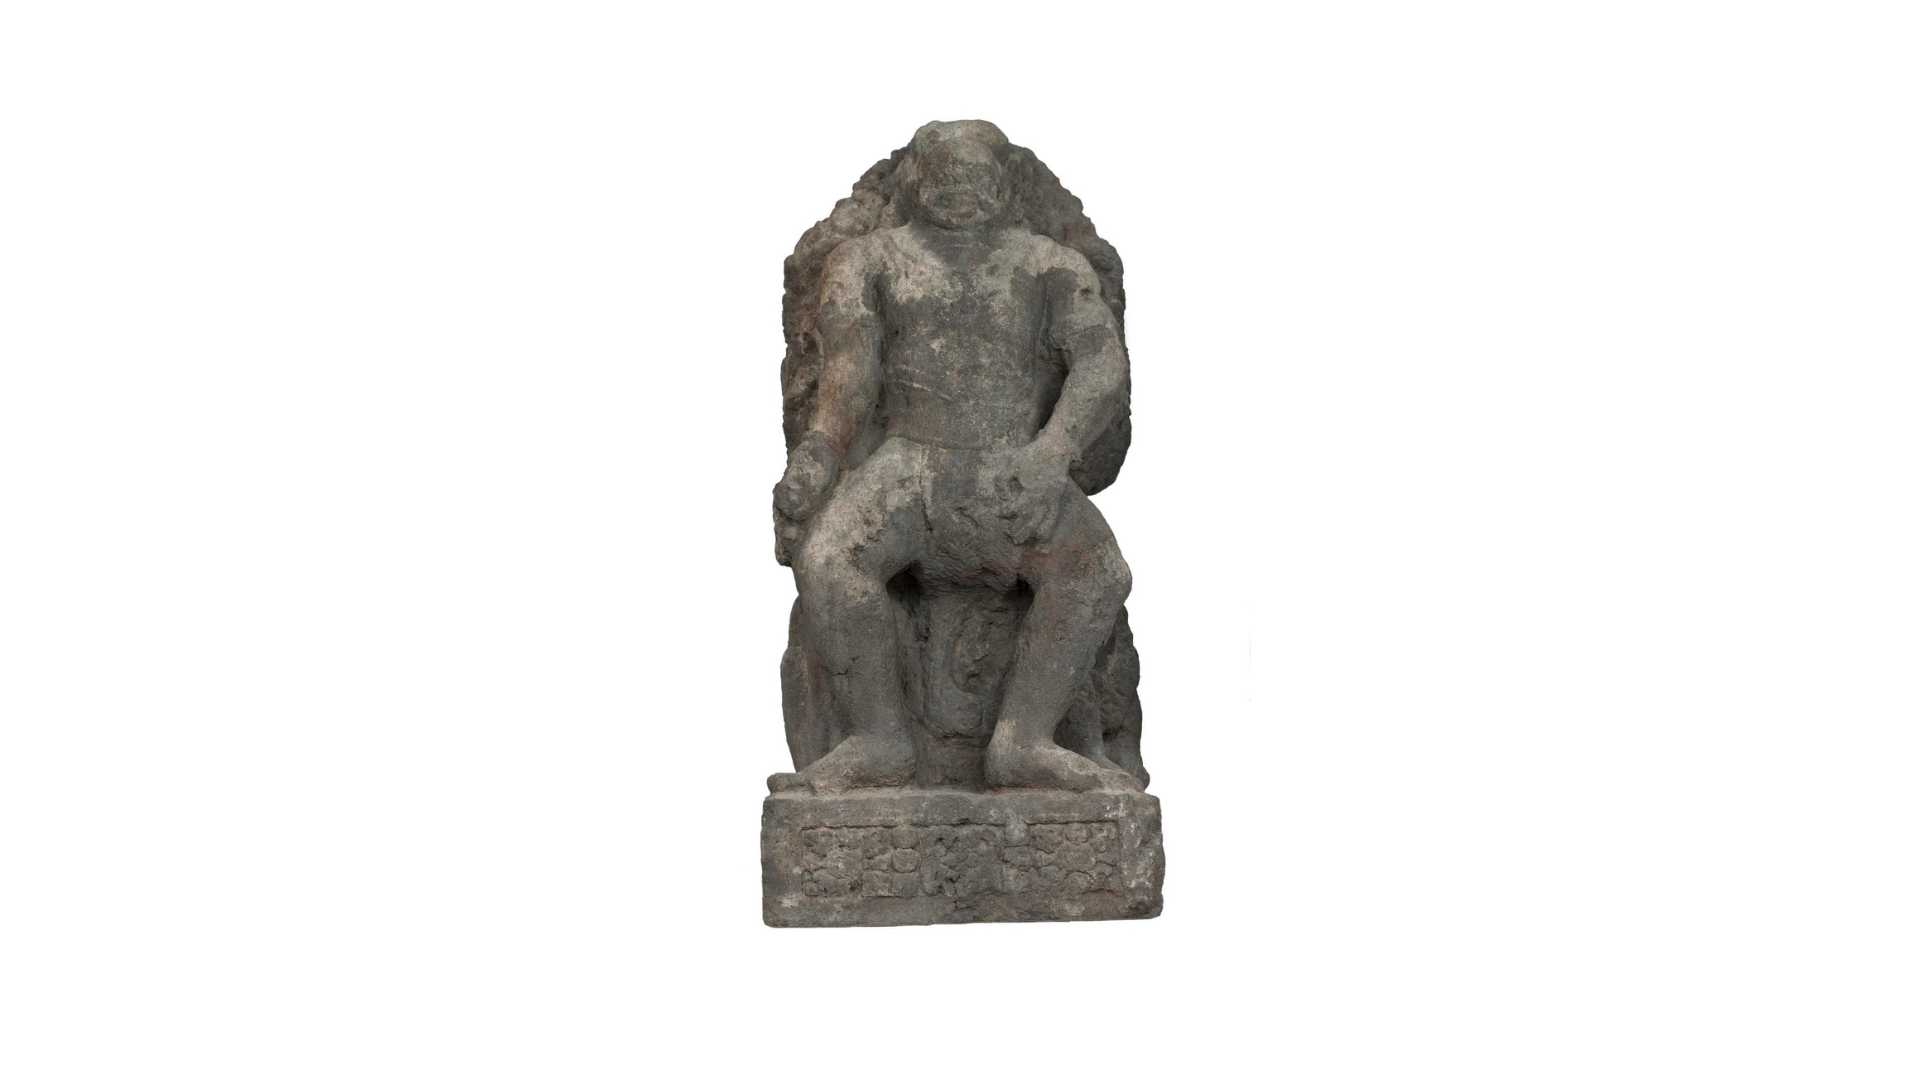 Hindu monkey god Hanuman standing in front of a tree with two squatted figures at the base.